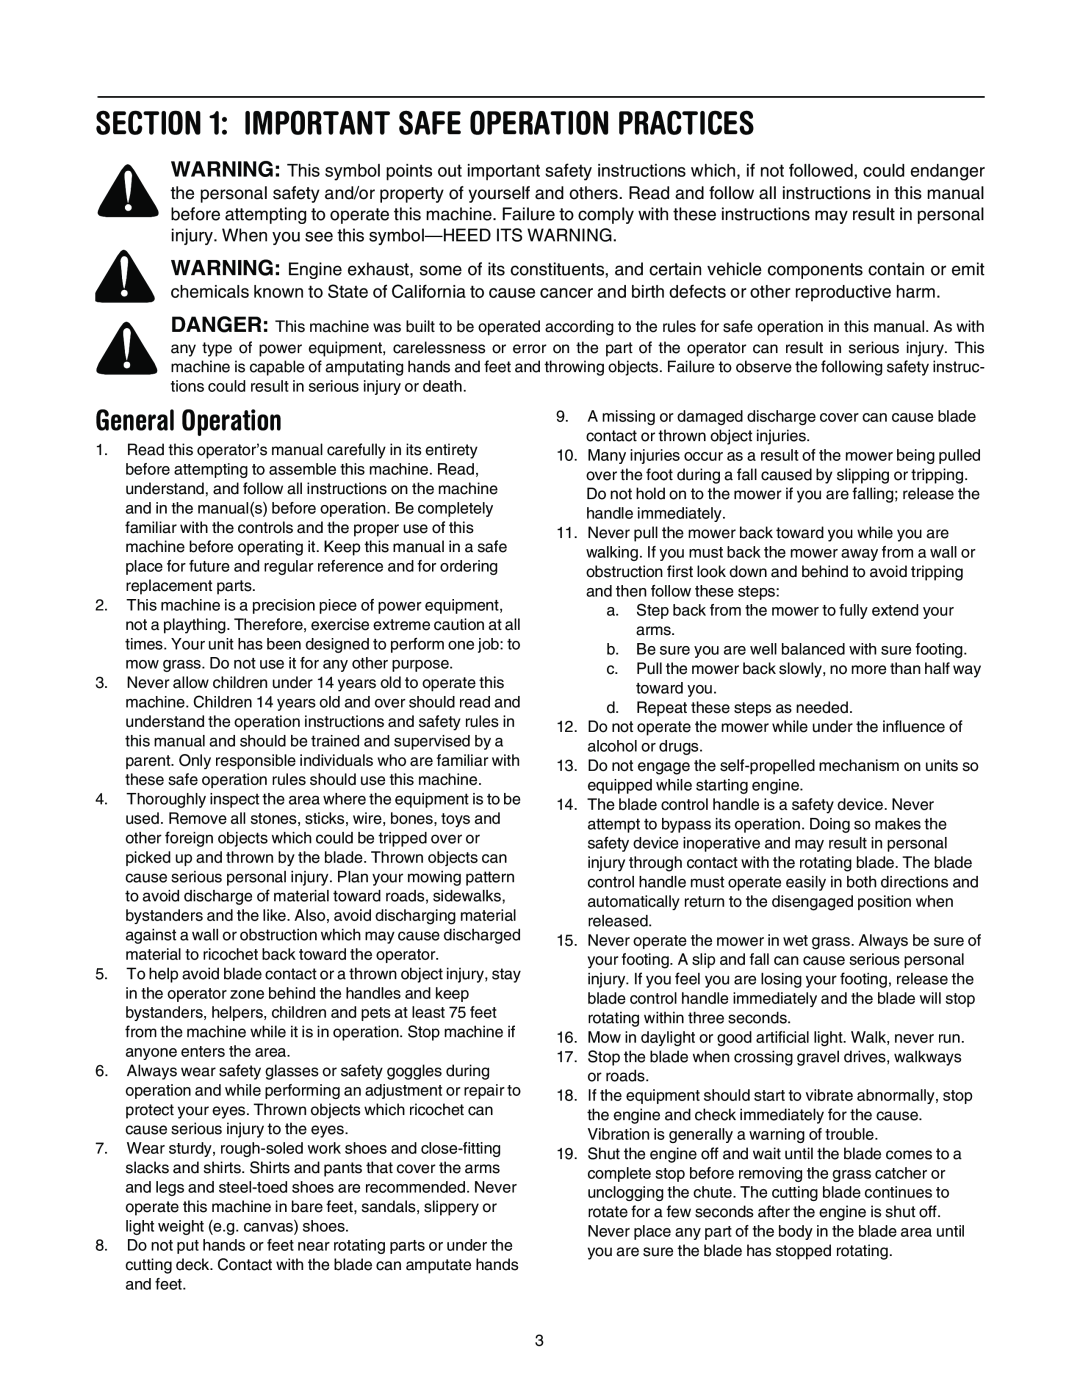 Yard-Man 107 manual Important Safe Operation Practices, General Operation 